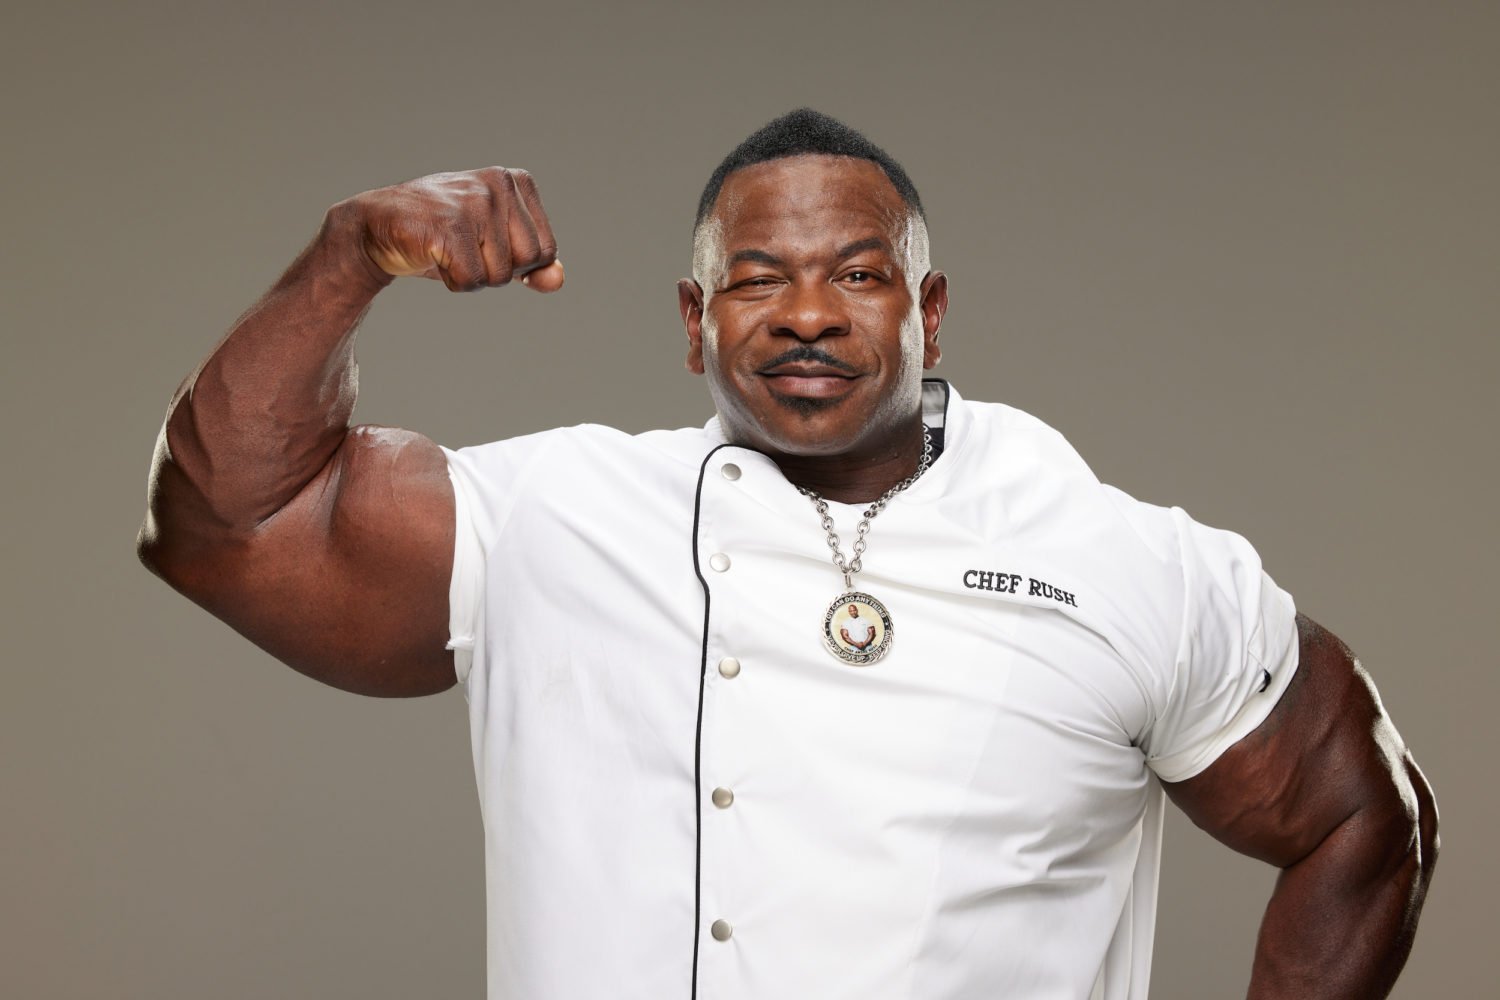 Chef Andre Rush is the star of Kitchen Commando. Photograph courtesy Studio Ramsay Global, LLC.